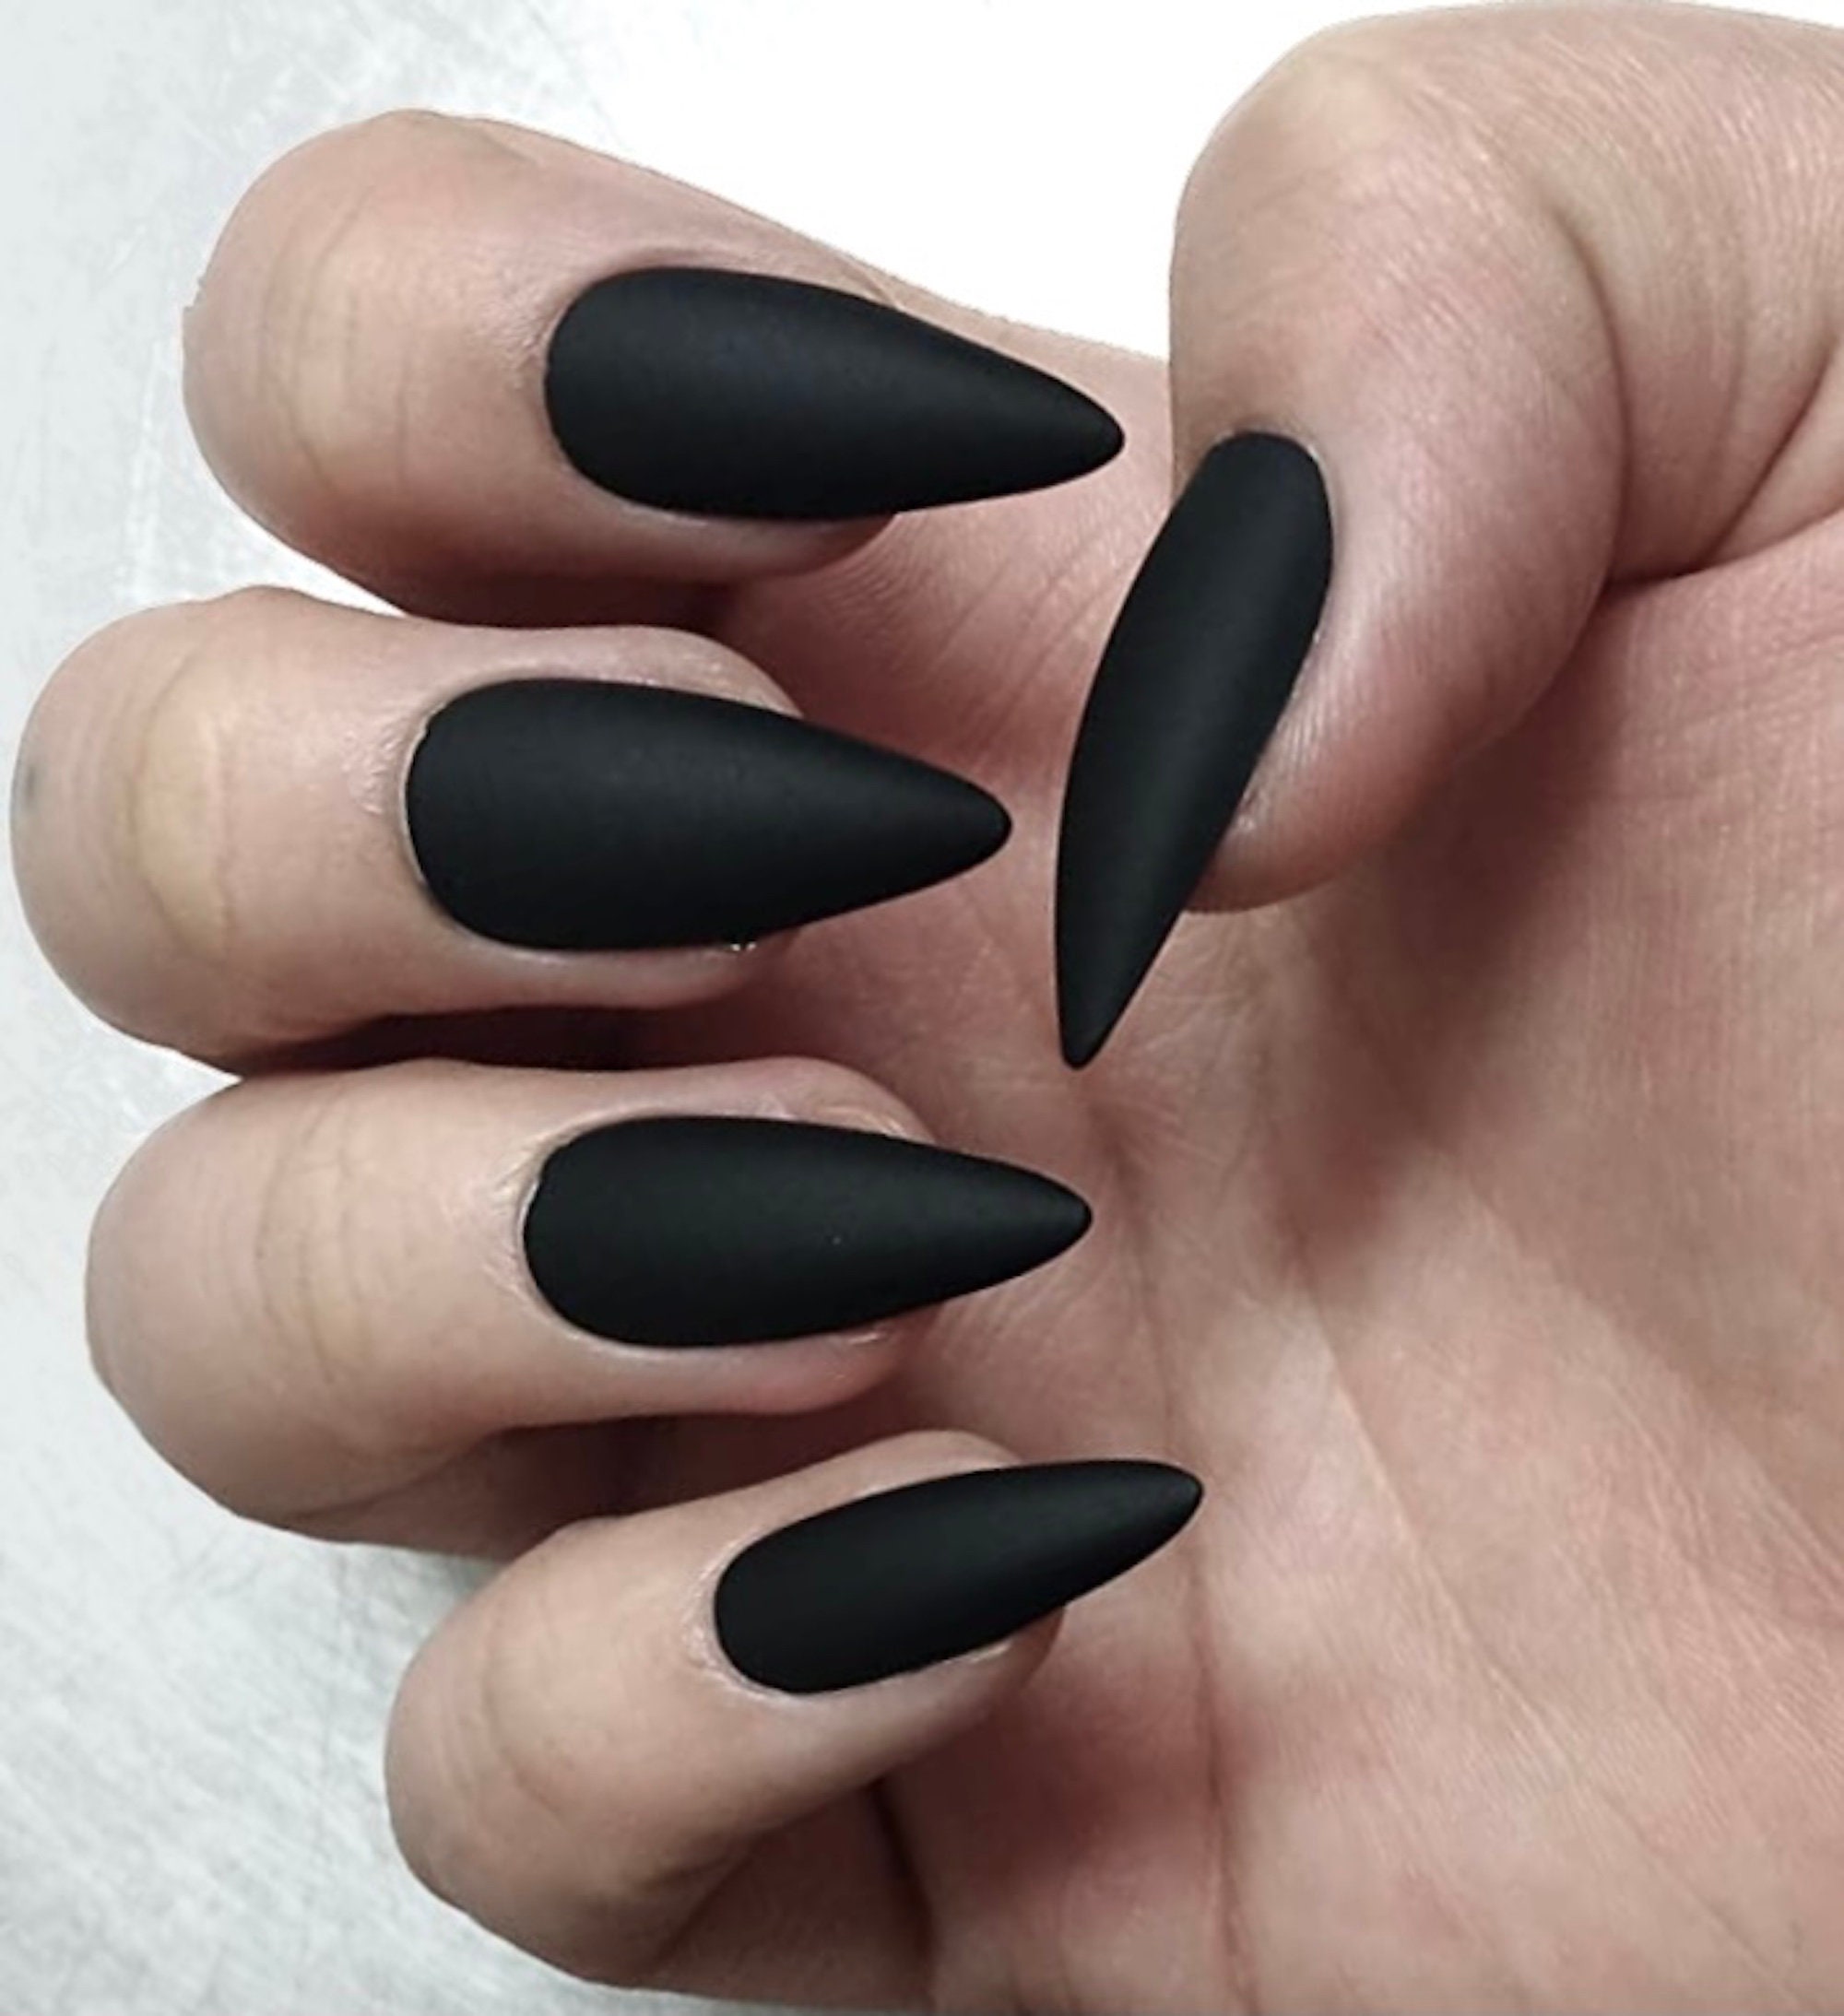 70+ Matte Black Coffin Nail Ideas Trend in Cool 2019 | Flickr